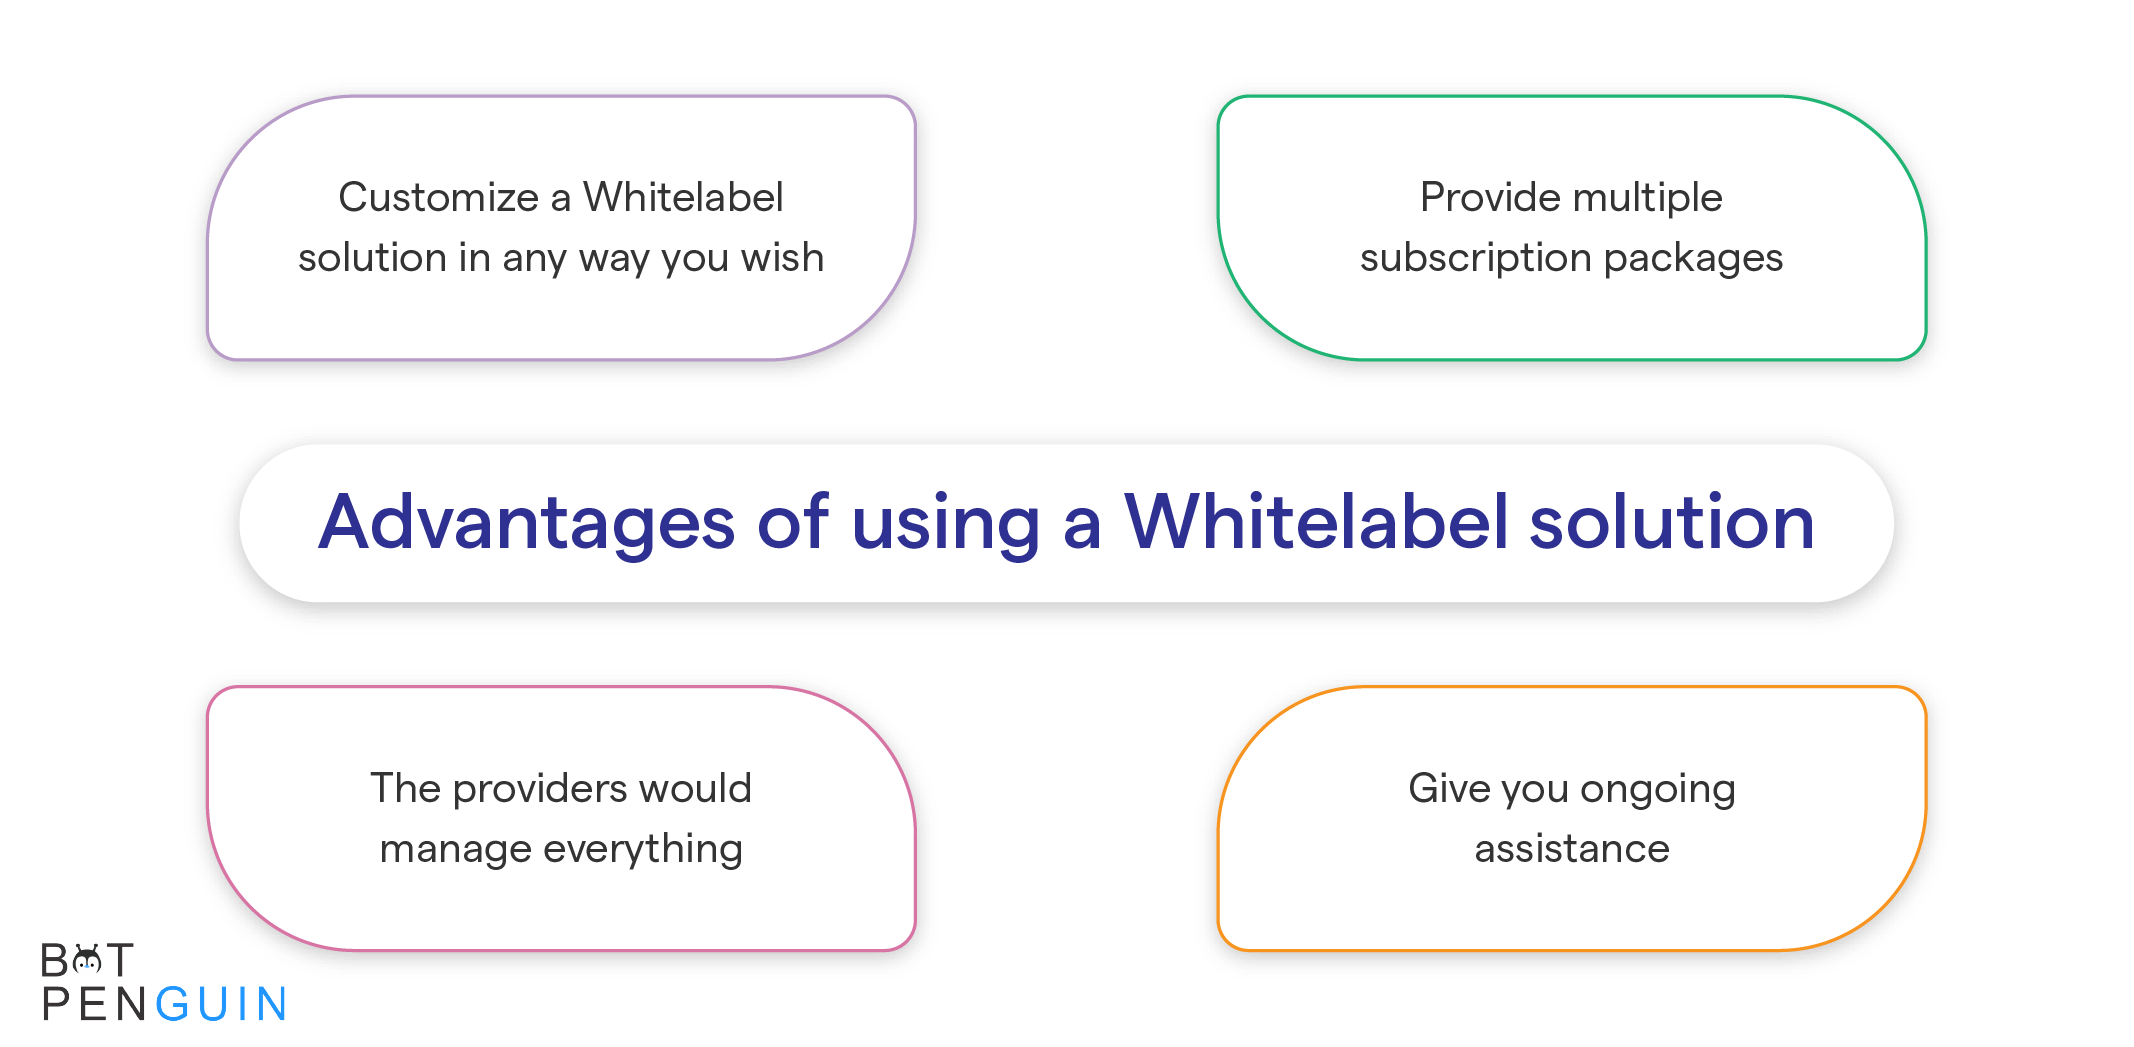 The following are some of the significant advantages of using a Whitelabel solution: